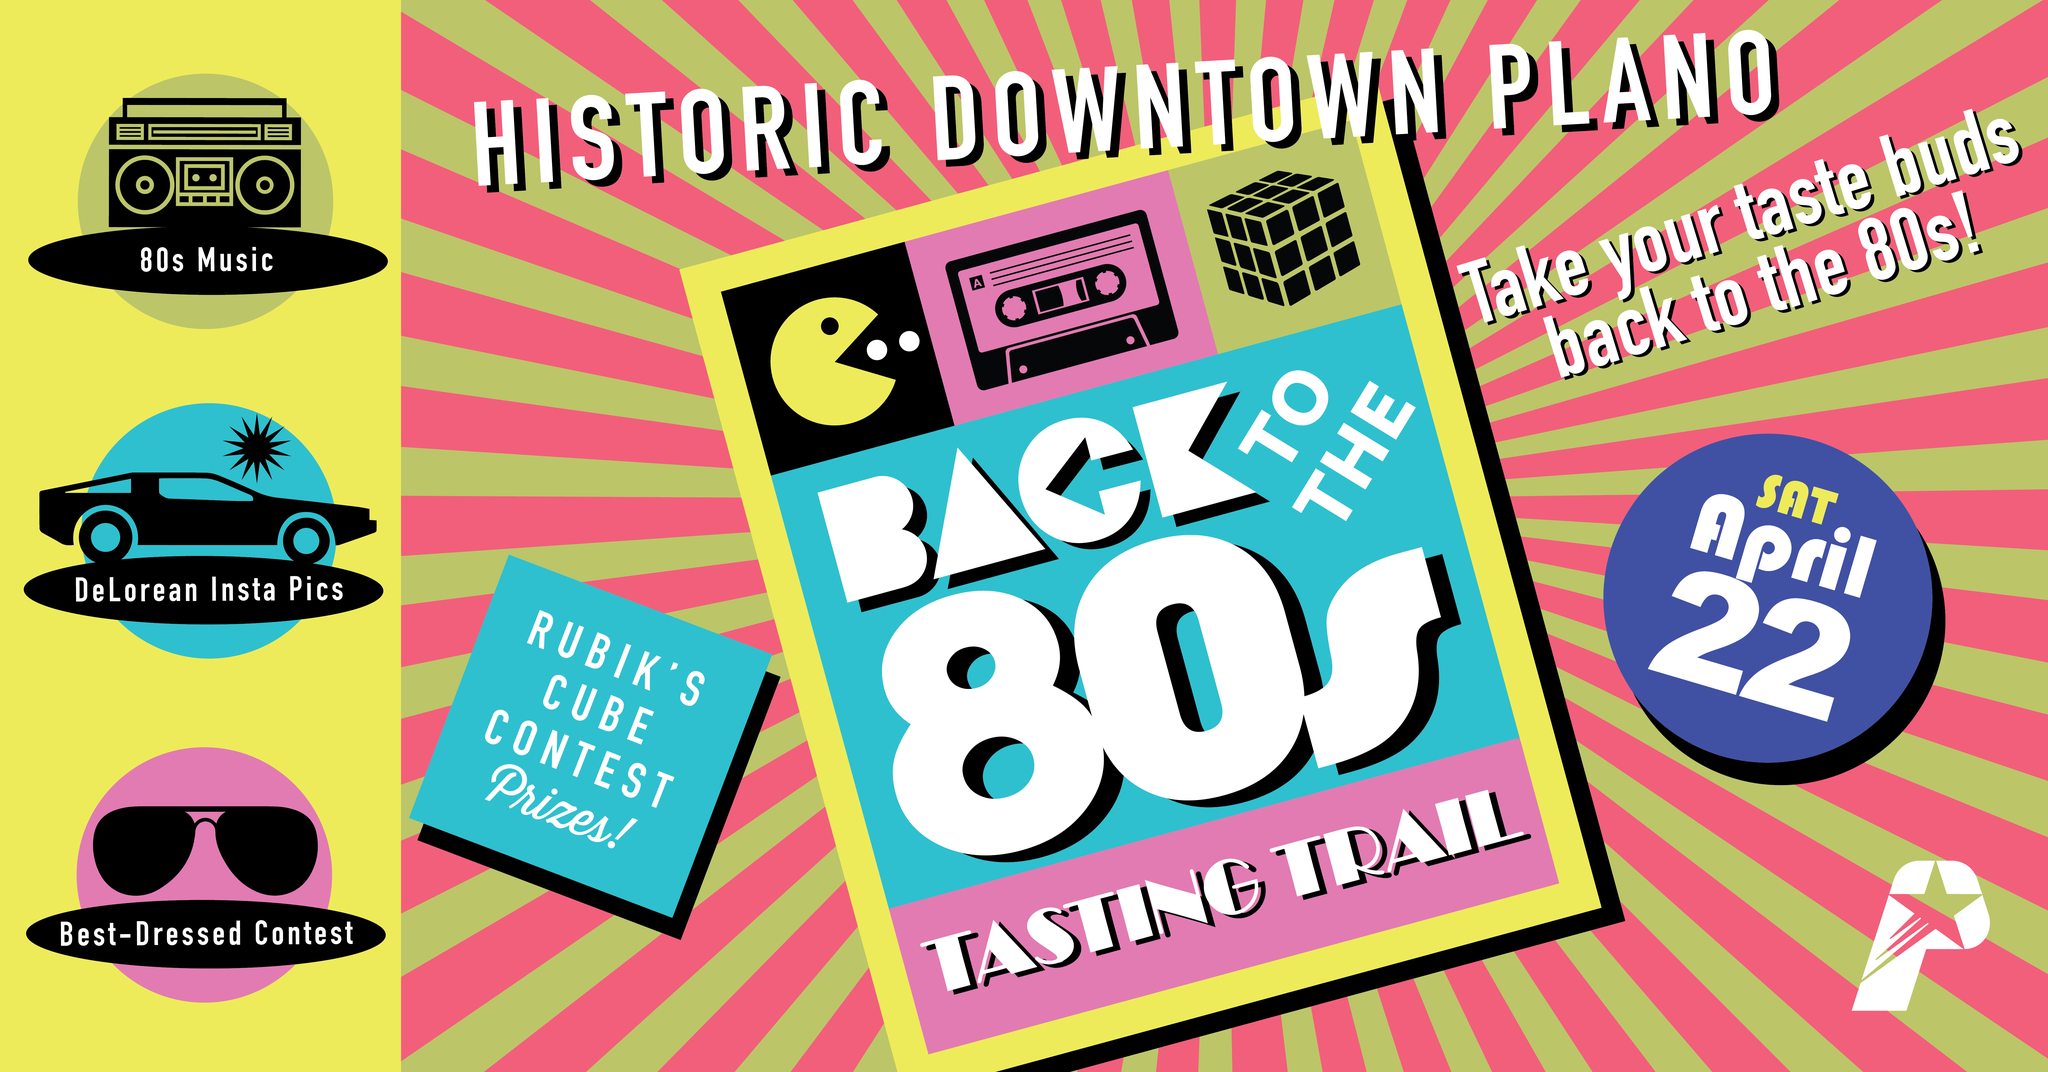 Downtown Plano Back to the 80s FB Image